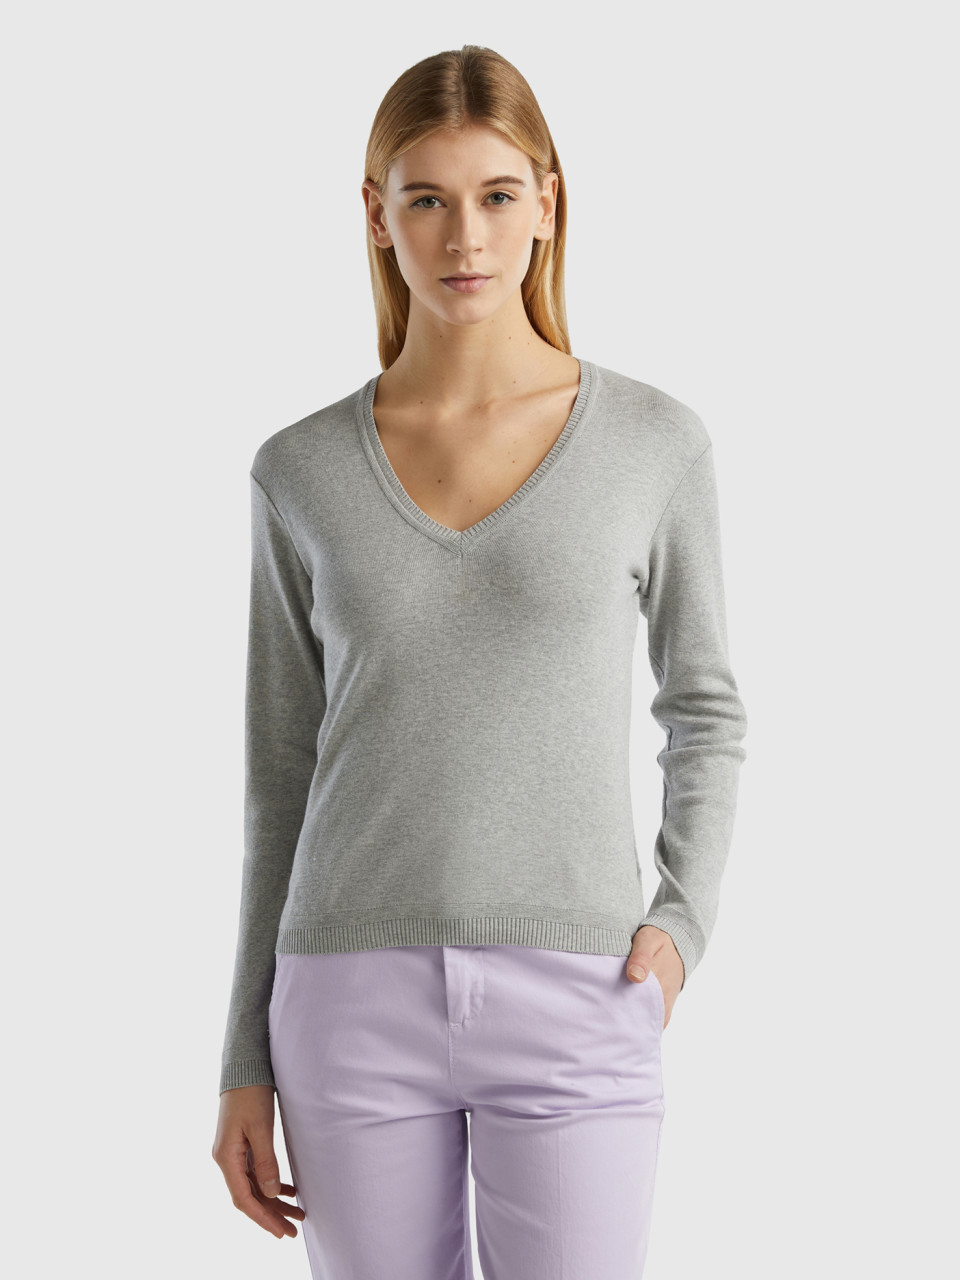 Benetton Online exclusive, V-neck Sweater In Pure Cotton, Light Gray, Women